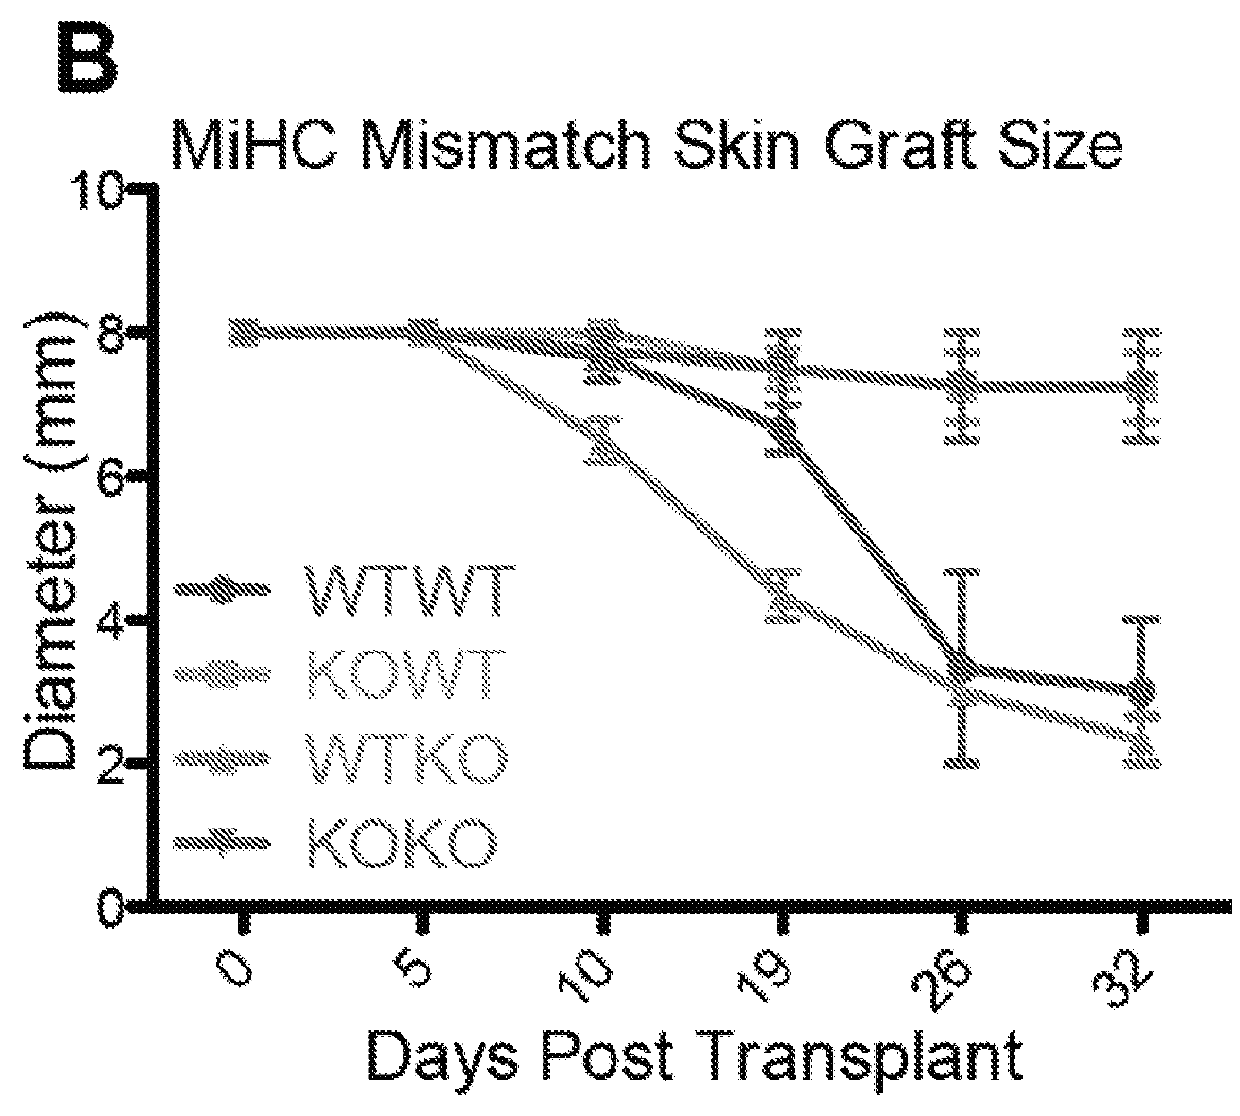 Regulating Transplant Rejection of Donor and Embryonic Stem Cell-Derived Tissues and Organs